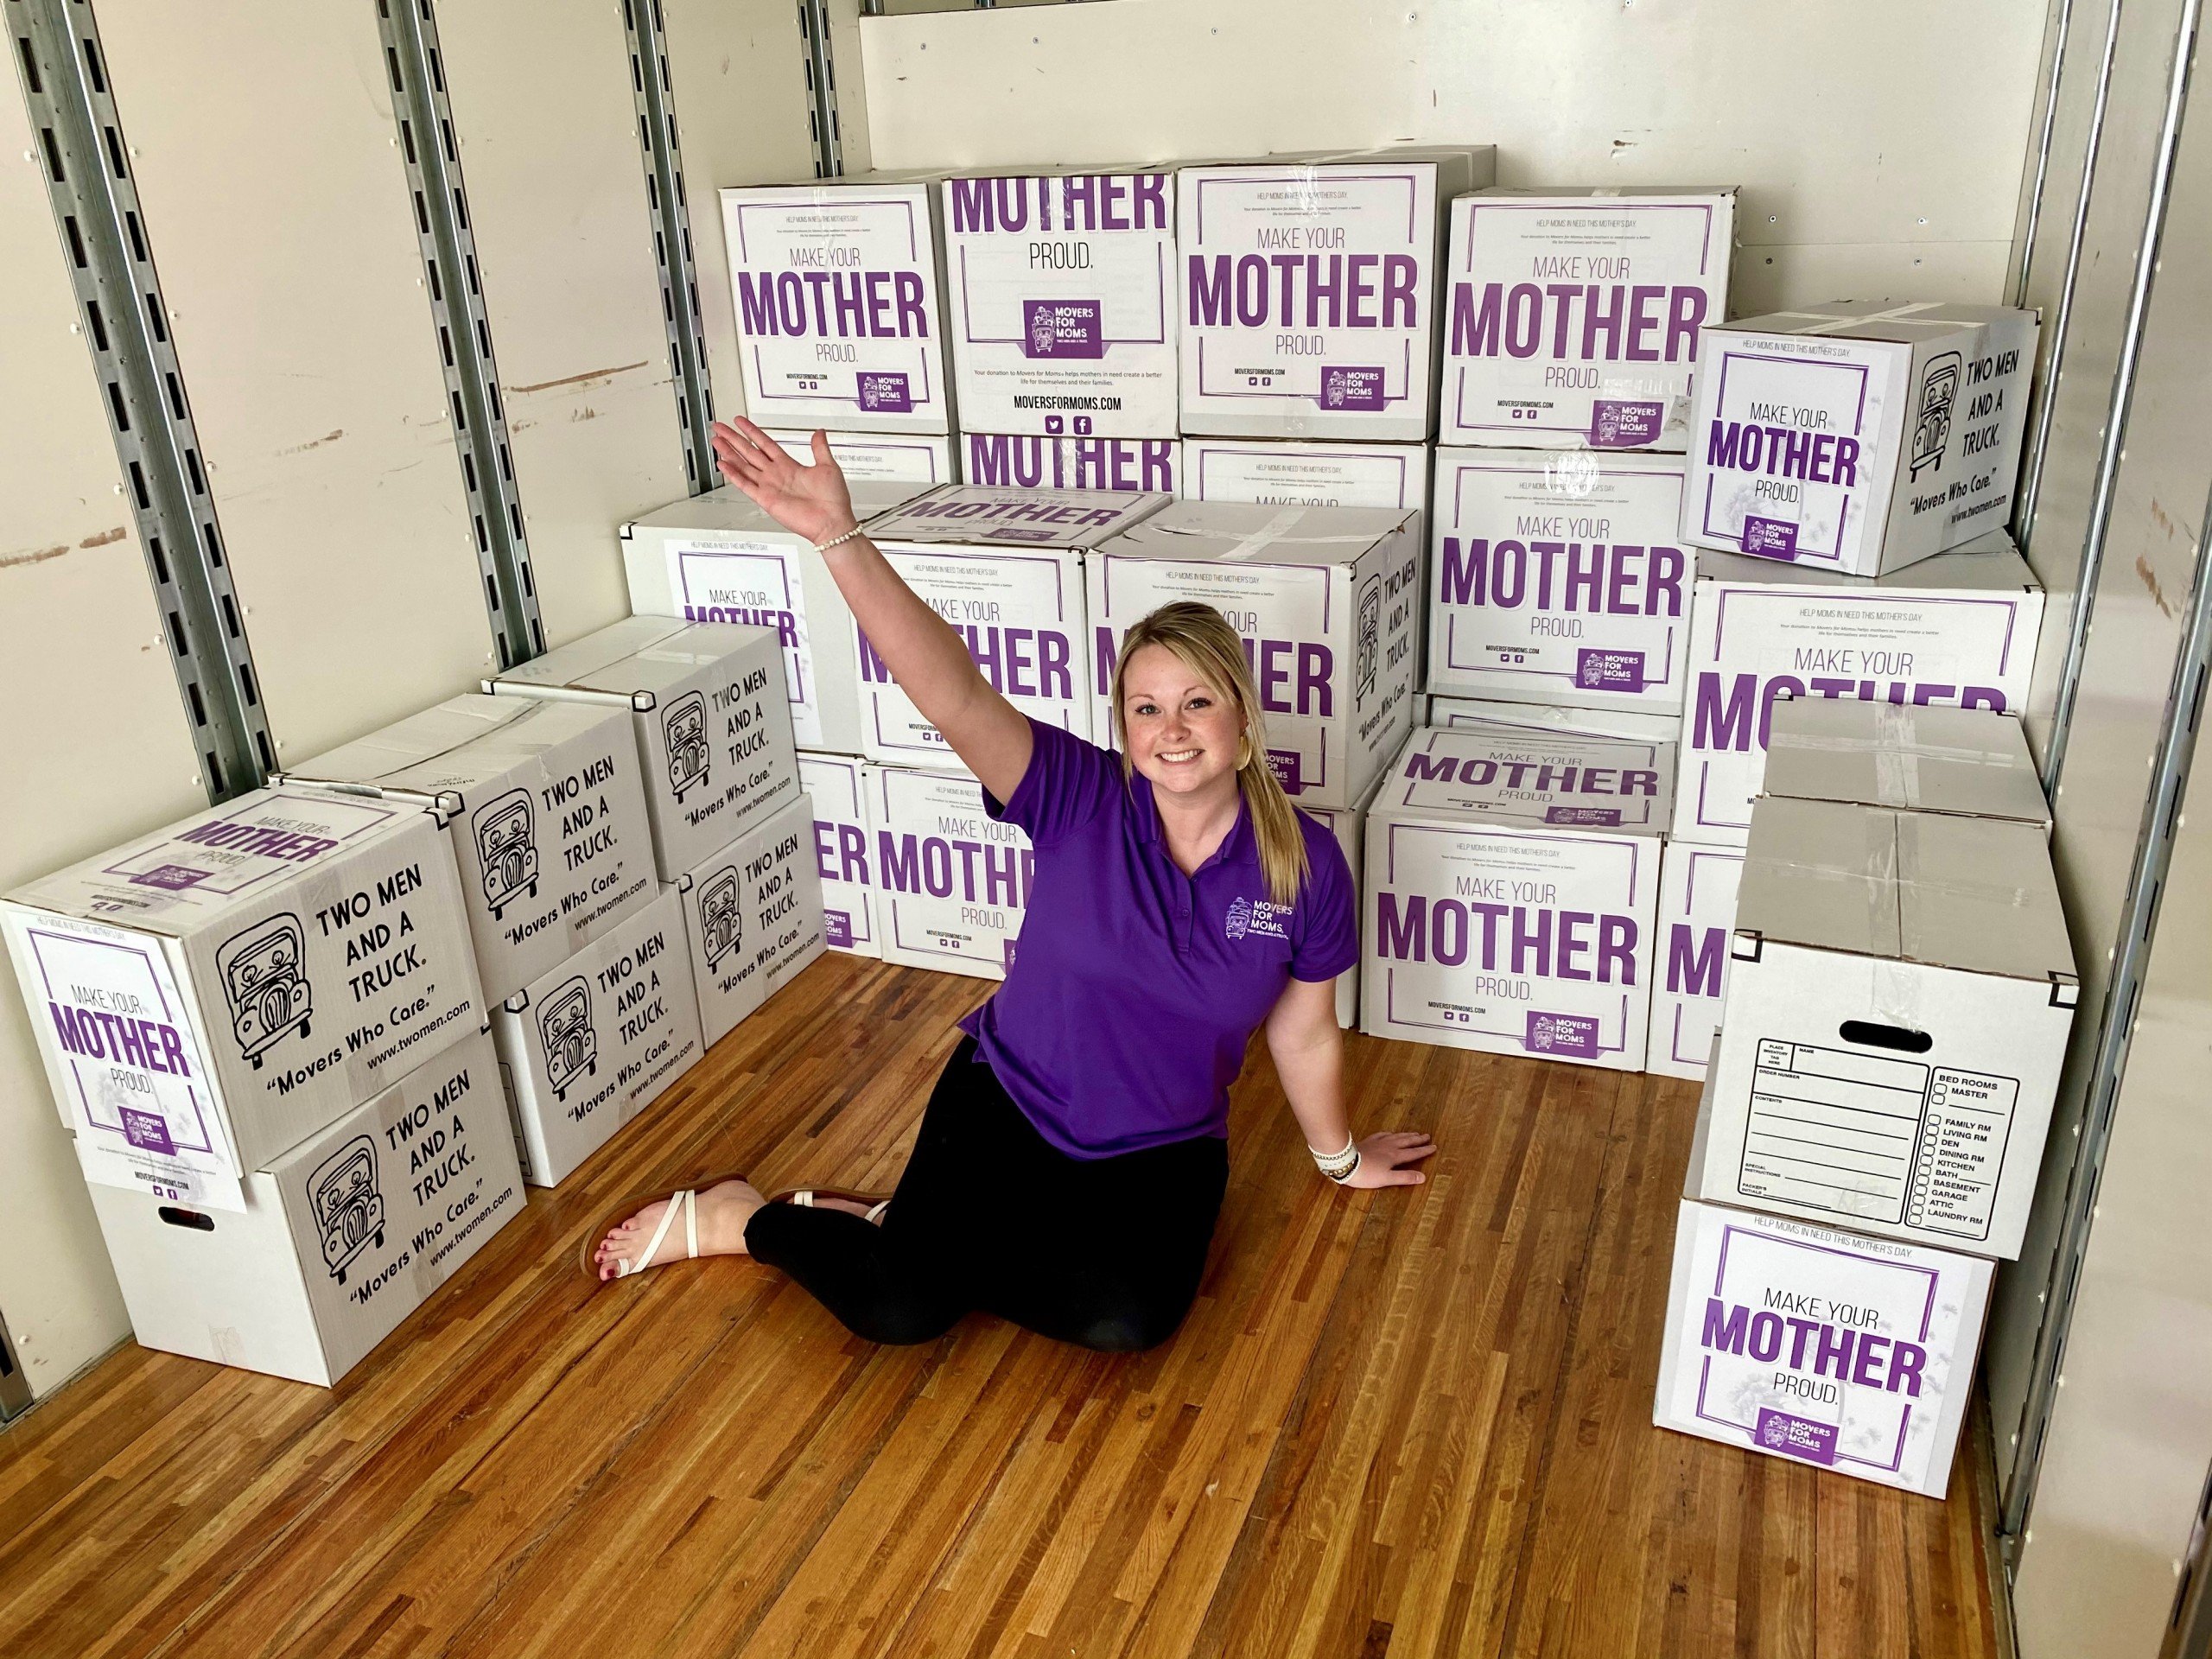 Movers For Moms Program Helps Domestic Violence Victims On Mothers Day 7538